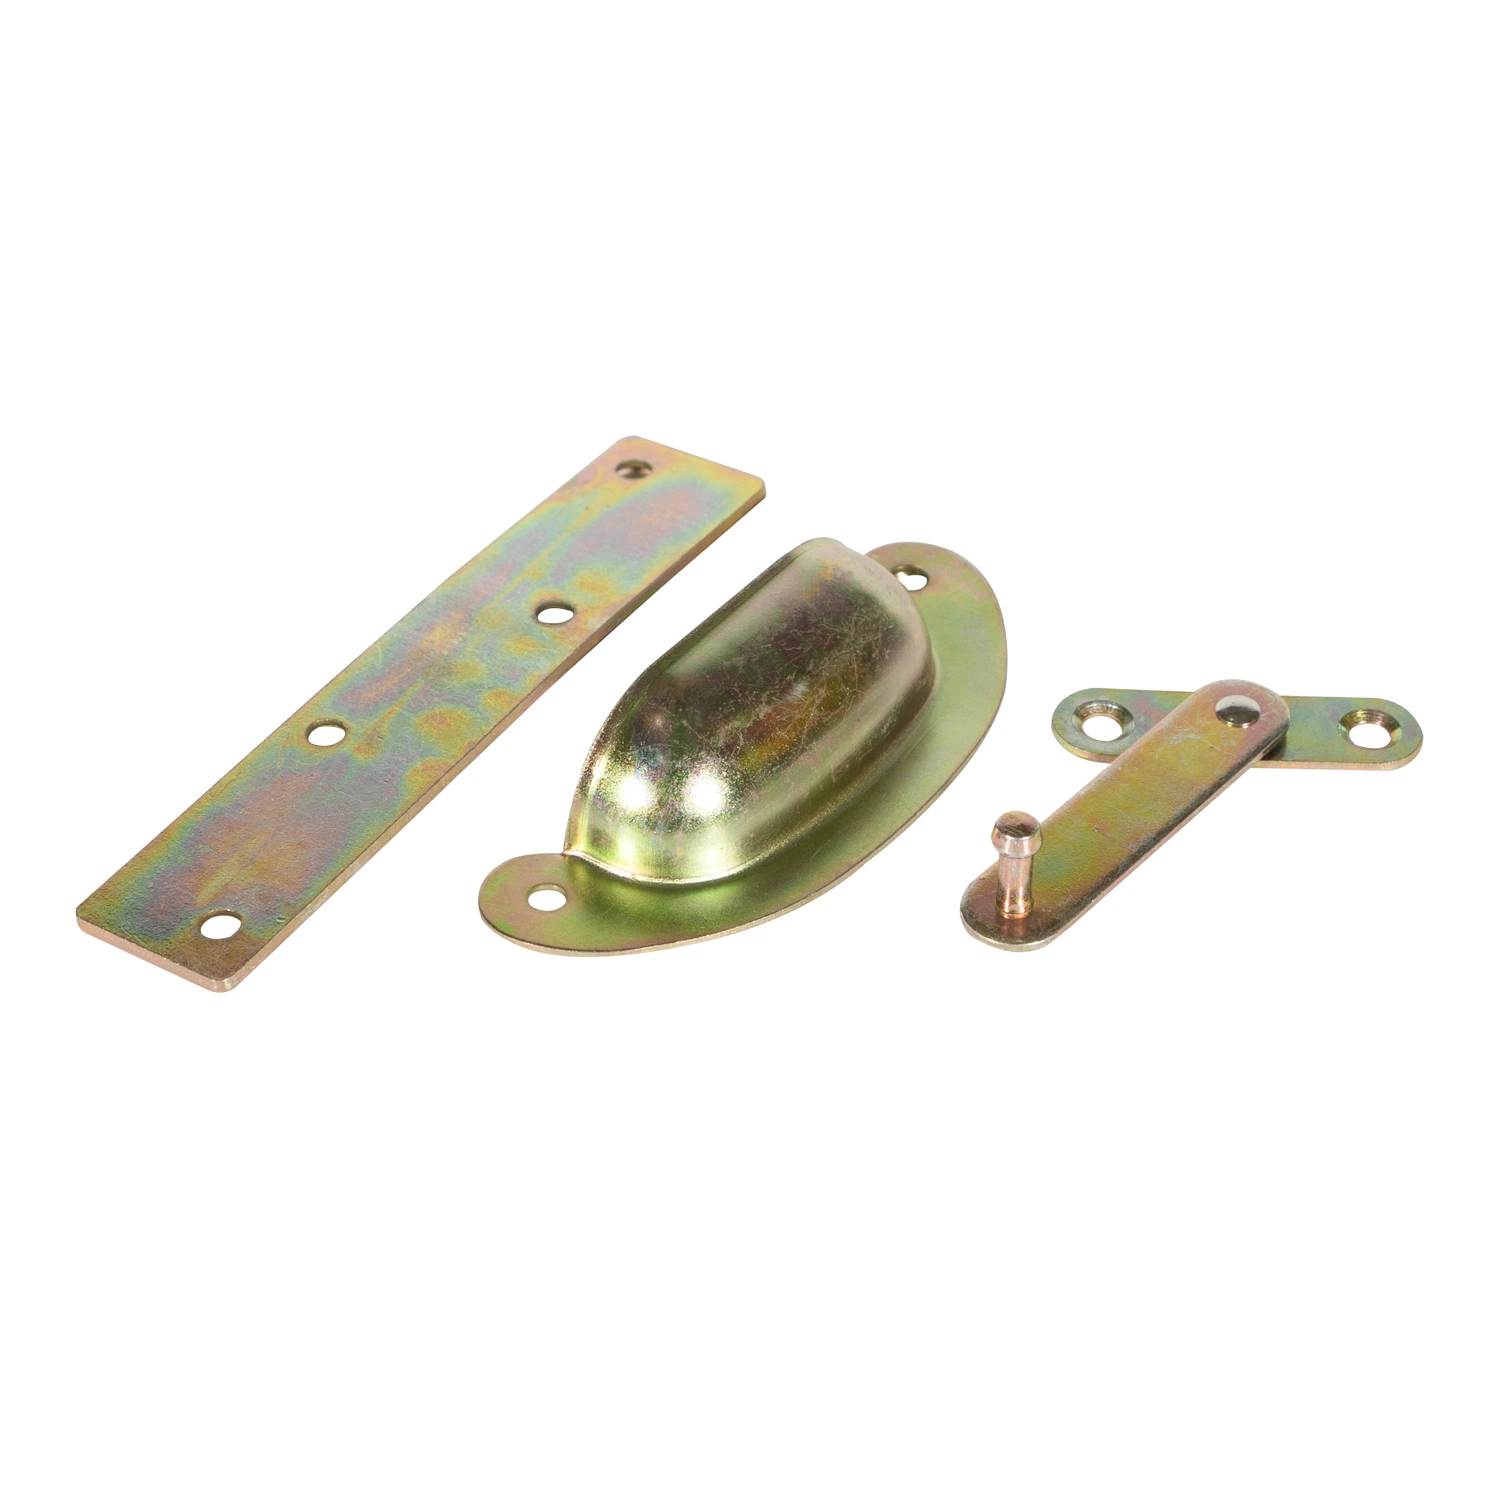 OEM Sheet Metal Fabrication Construction Machinery Parts Stainless Steel Brass Stamping Bending Parts